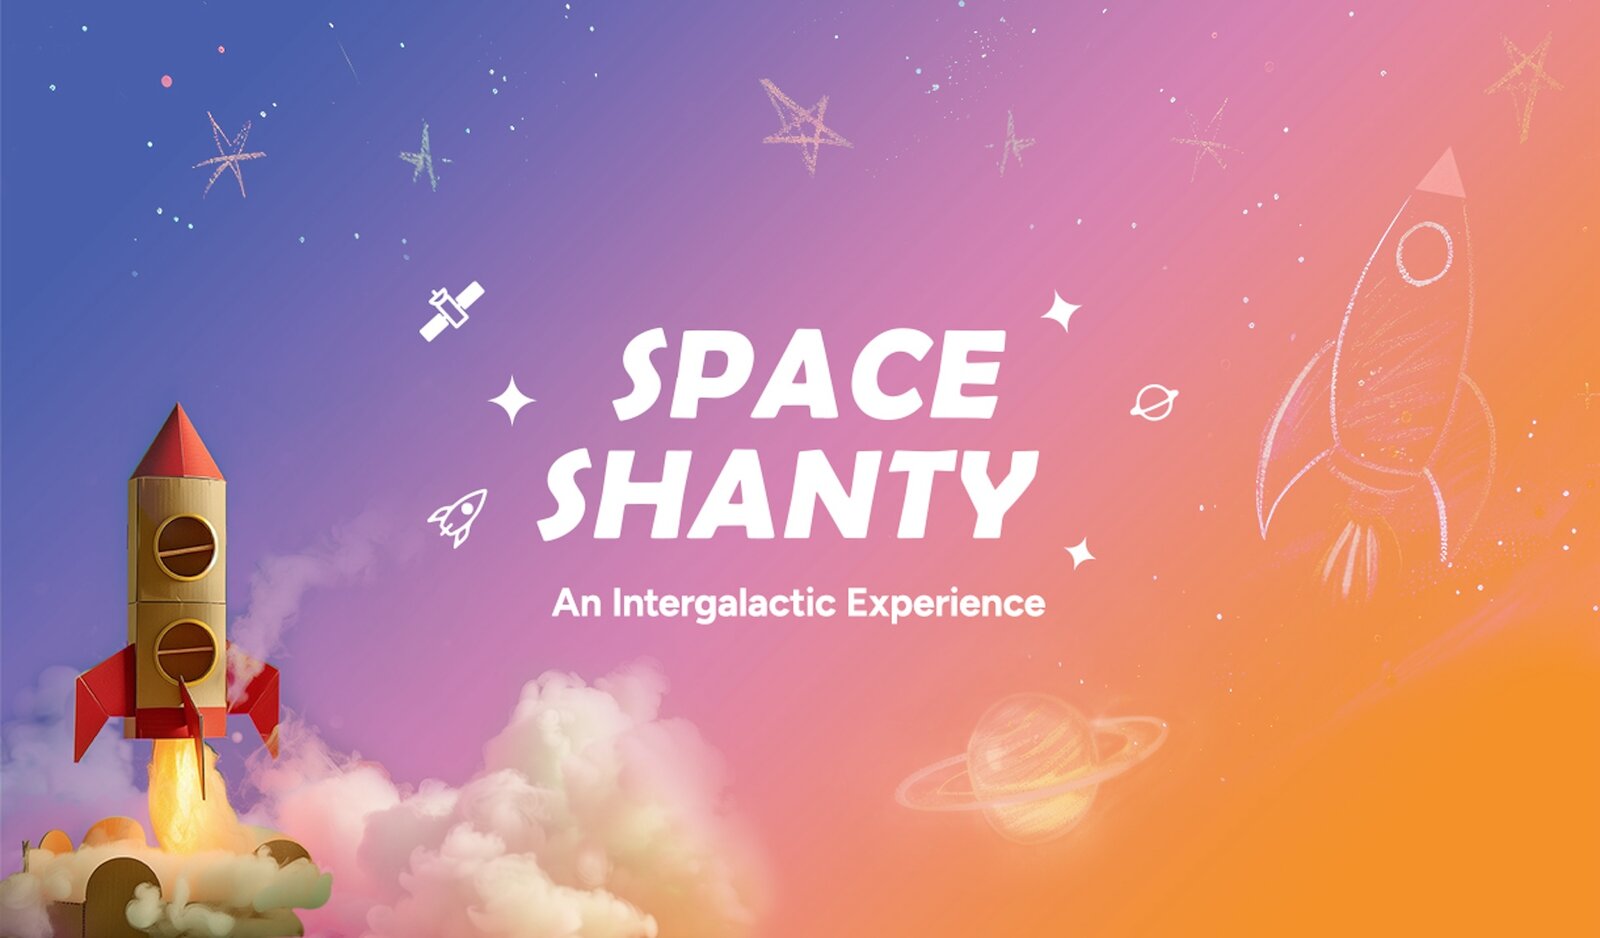 A brightly coloured background in pastel shades of blue, pink and yellow stes the scene for the words Space Shanty with a red and brown ricket made of cardboard blasting off besides this.